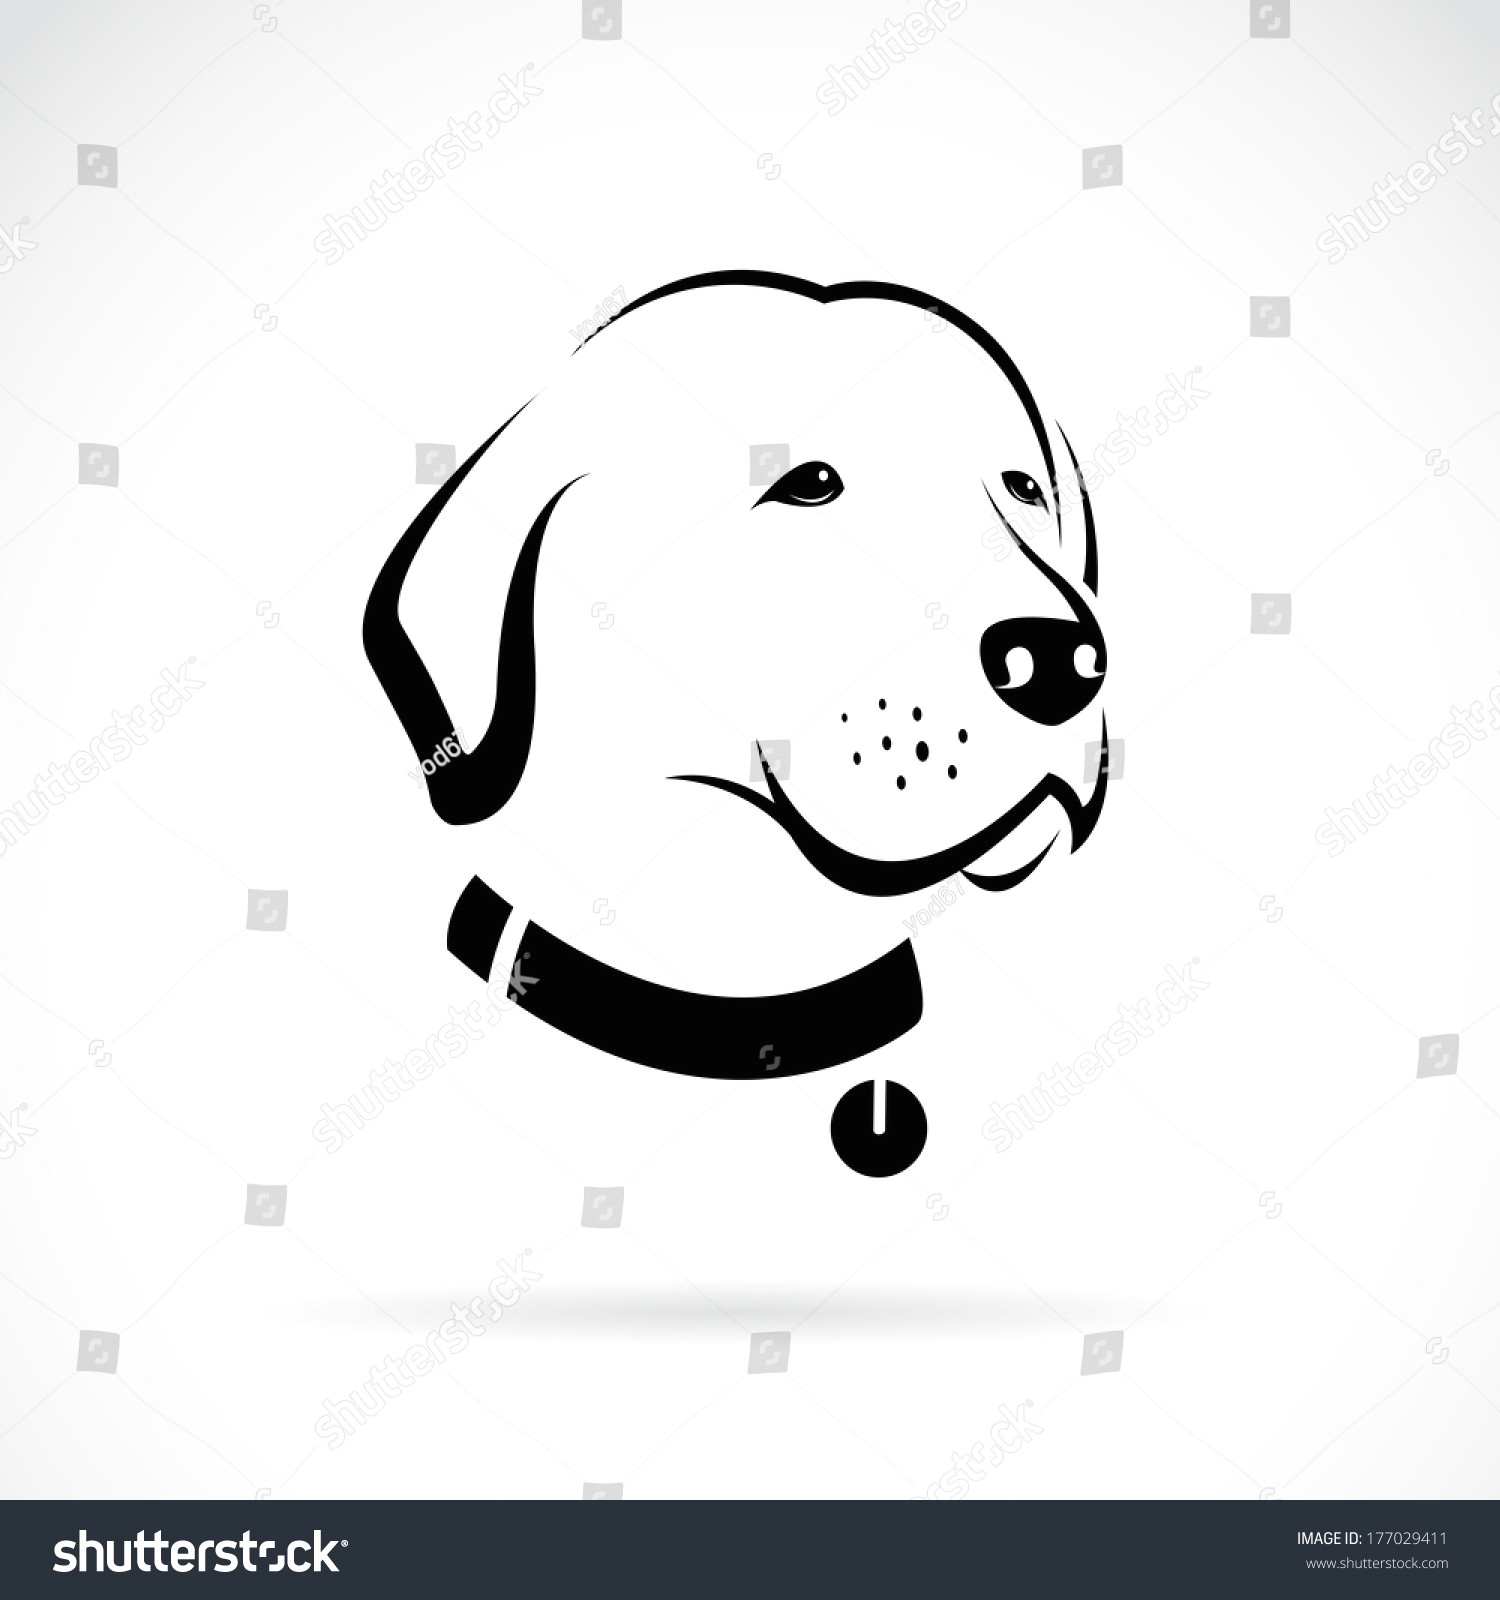 Line Drawing Dog Head Vector Image Labrador Dogs Head On Stock Vector Royalty Free